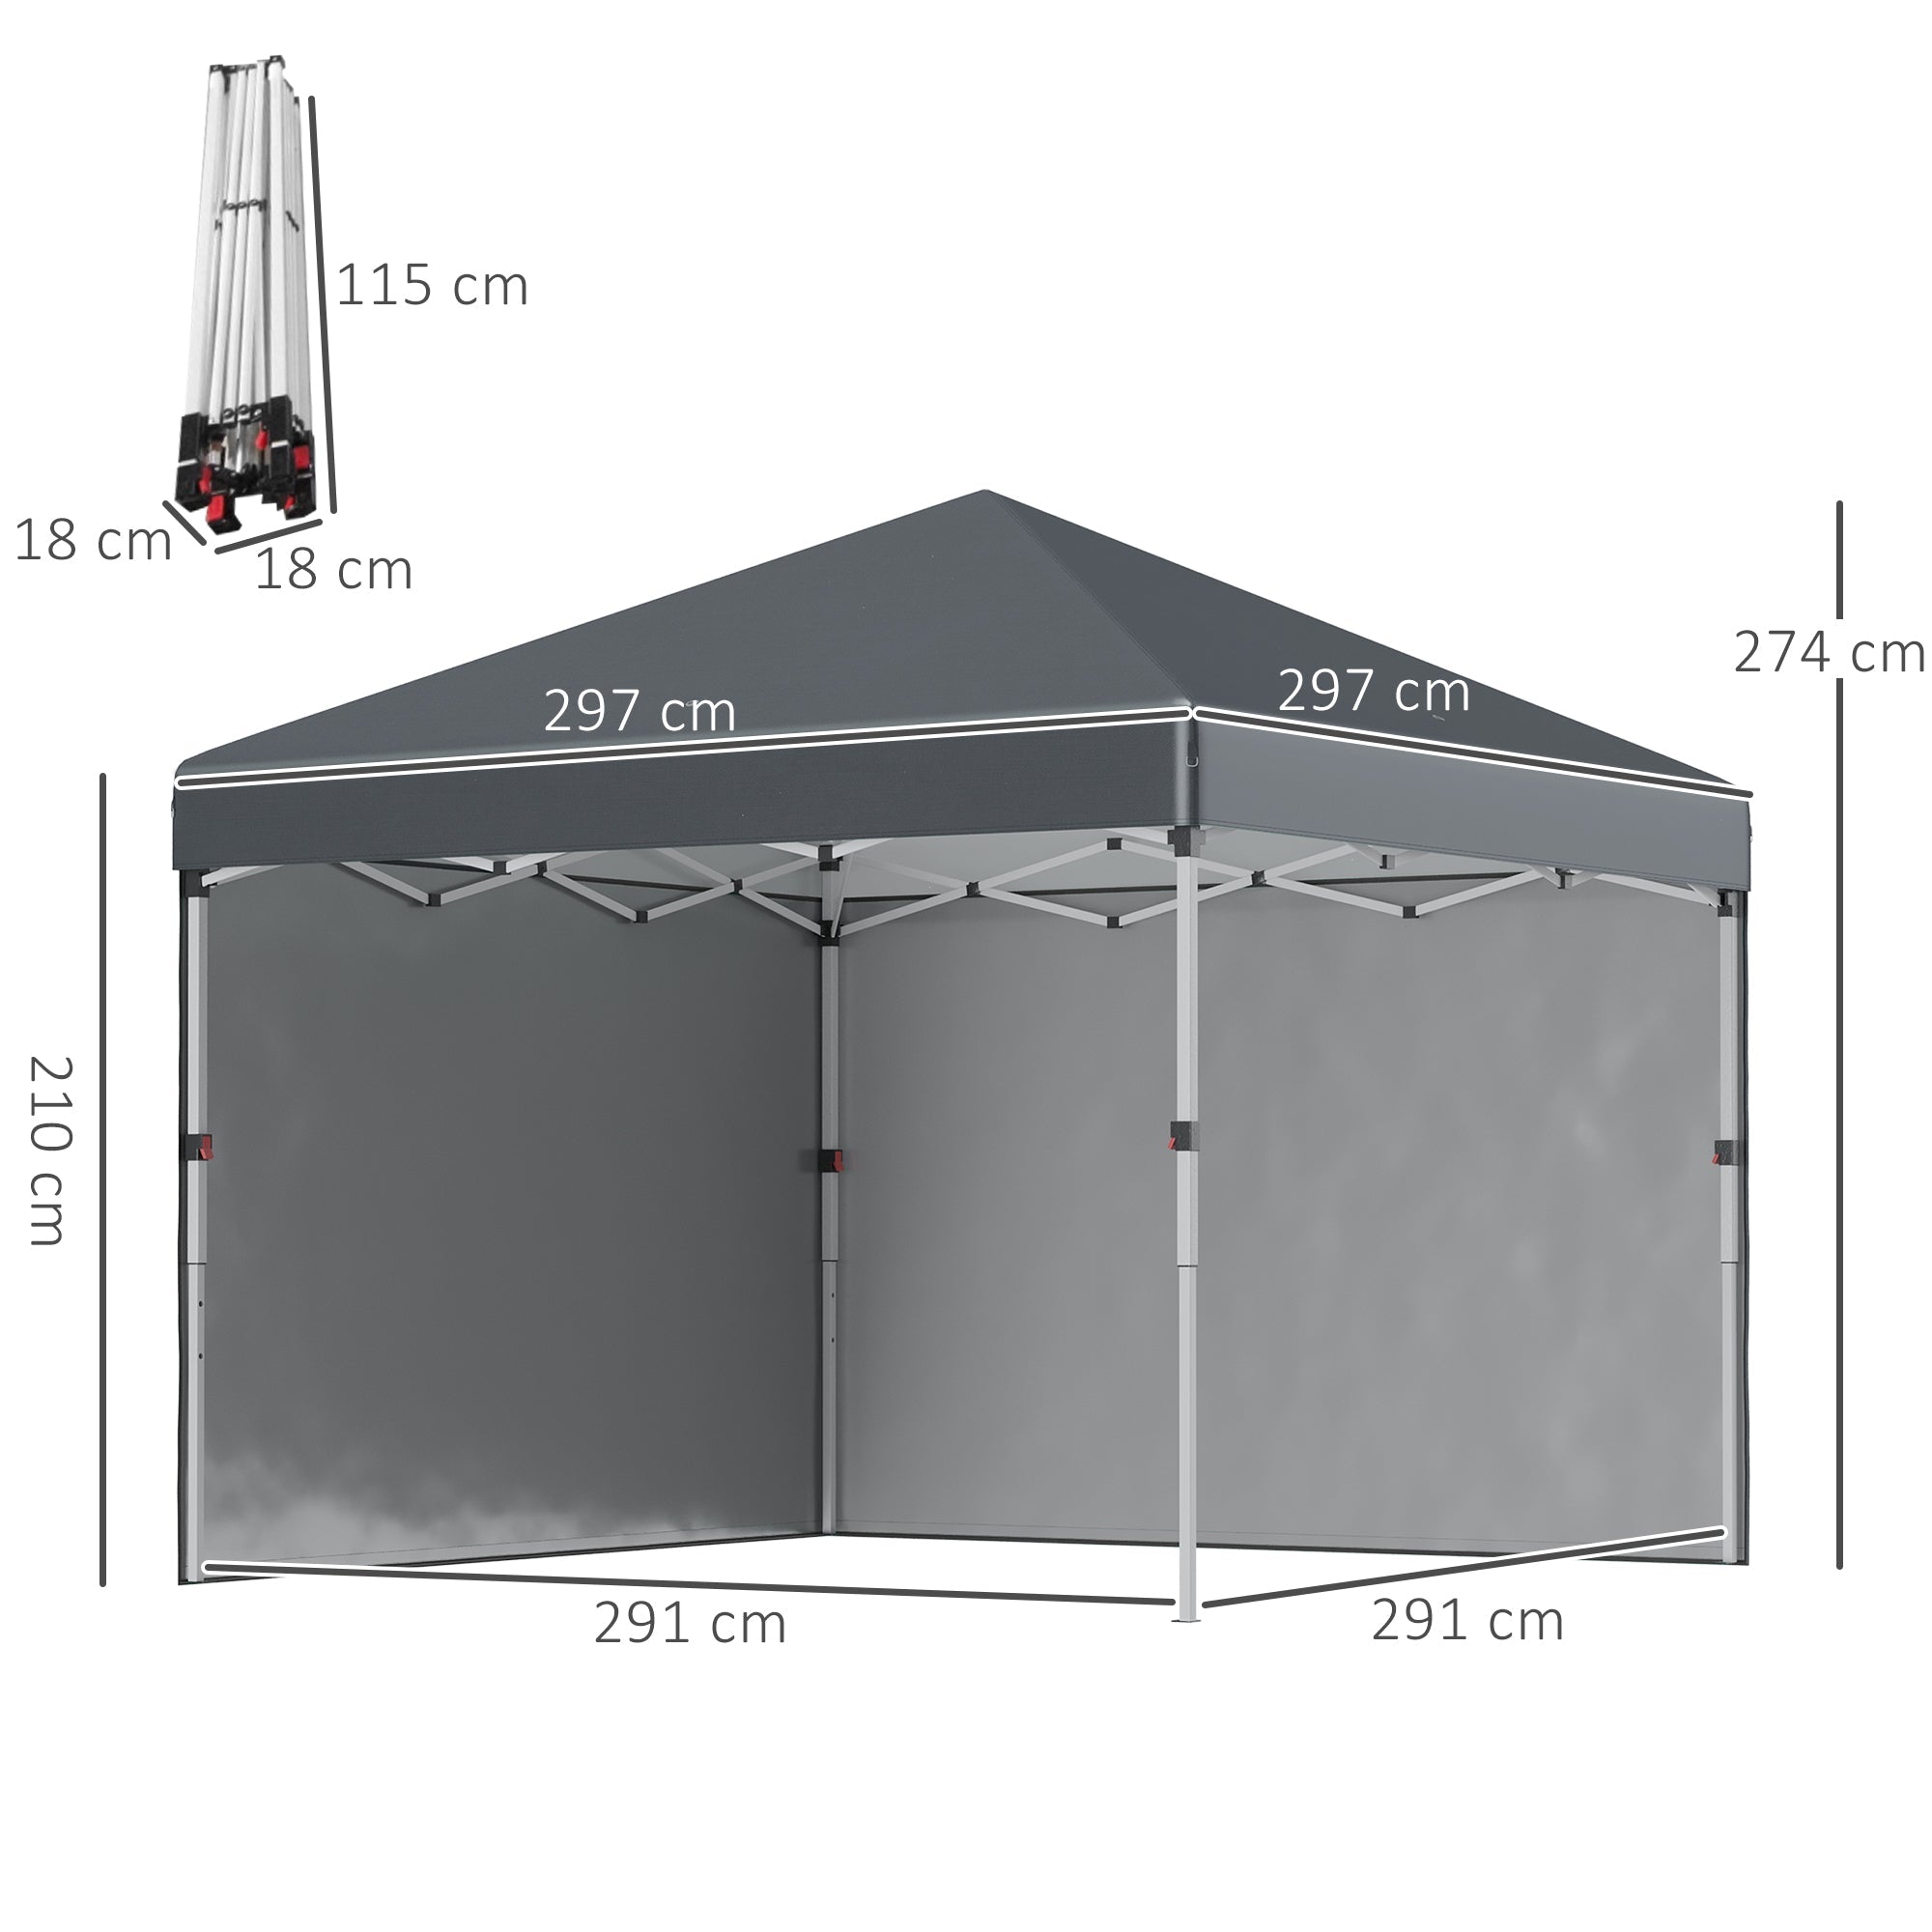 3 x 3 (M) Pop Up Gazebo with 2 Sidewalls, Leg Weight Bags and Carry Bag, Height Adjustable Party Tent Event Shelter for Garden, Dark Grey-2